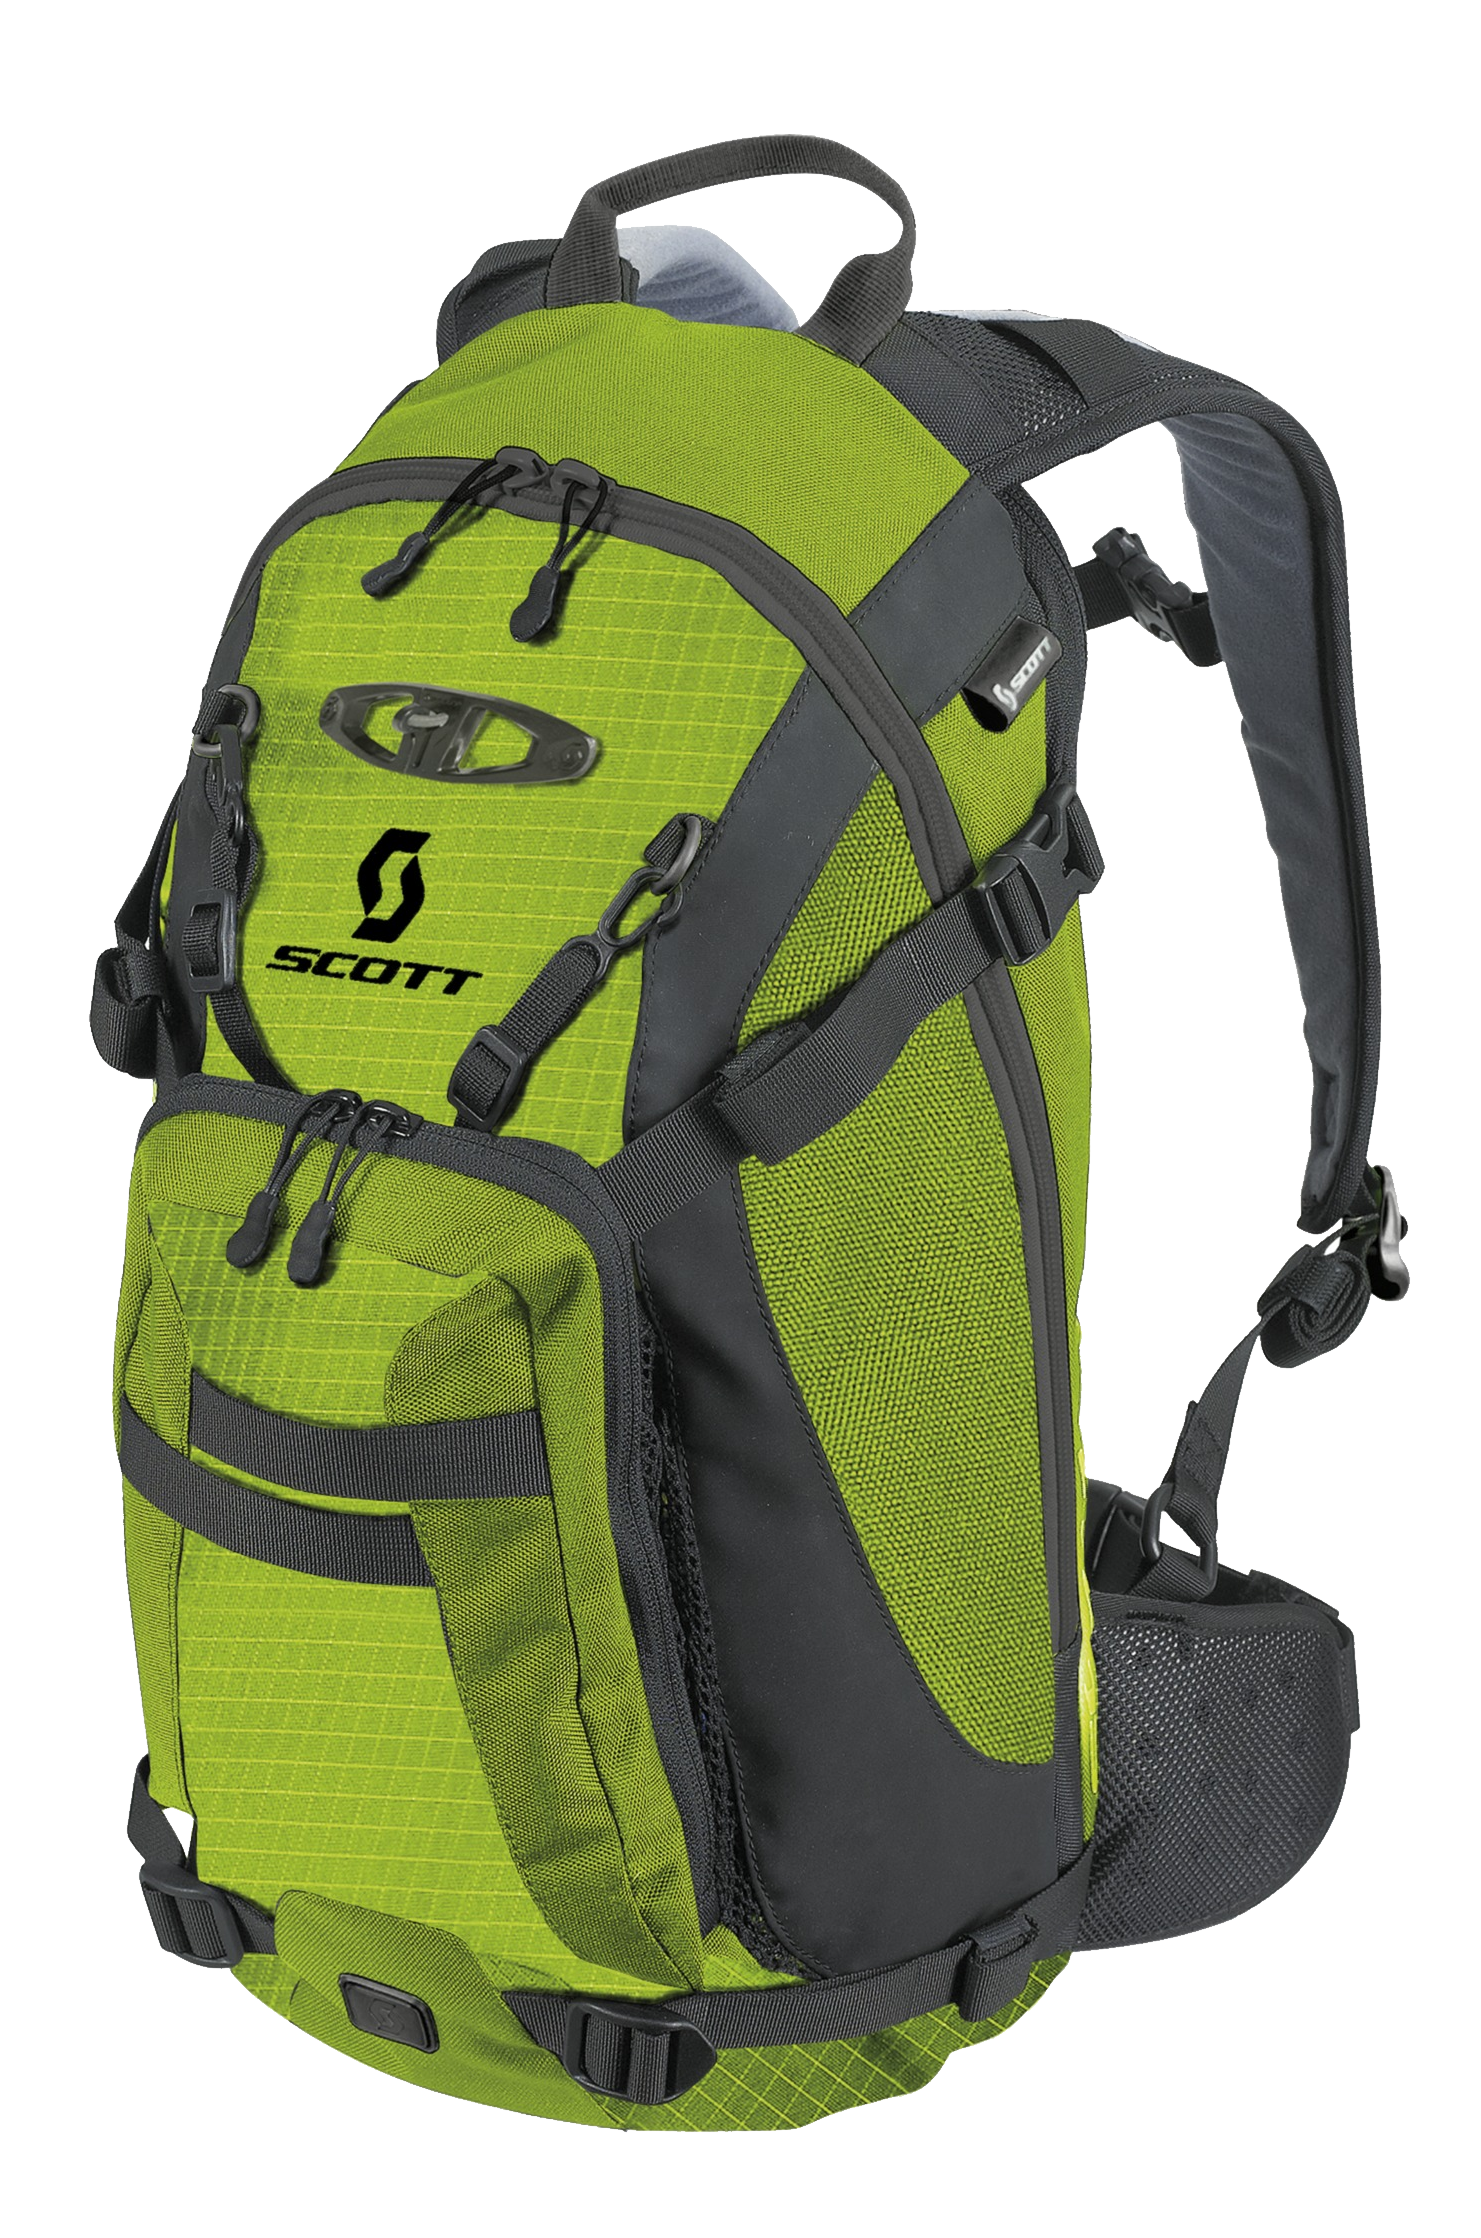 Backpack PNG HD Images - Backpack Png